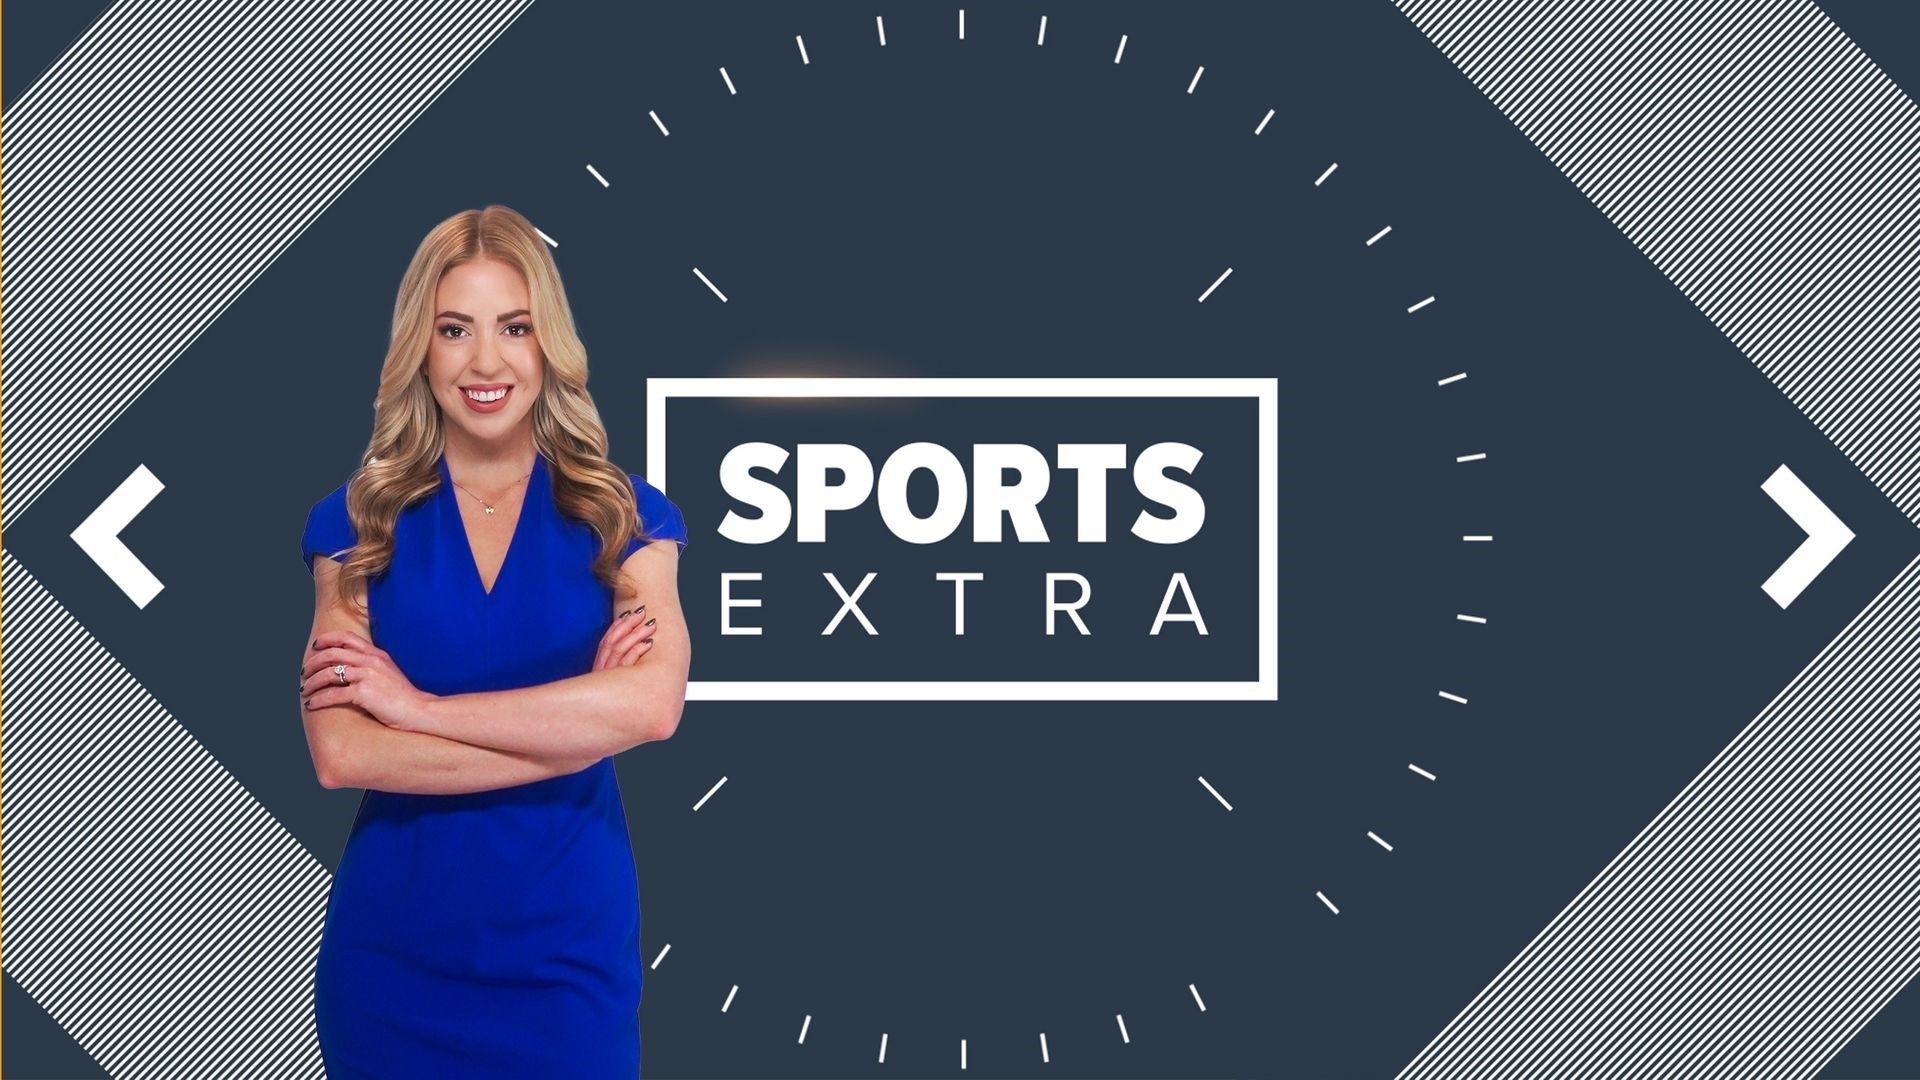 Maria Martin is joined by 680 The Fan’s “Hometeam” Brandon Leak and the AJC’s Sarah Spencer on this week’s Sports Extra